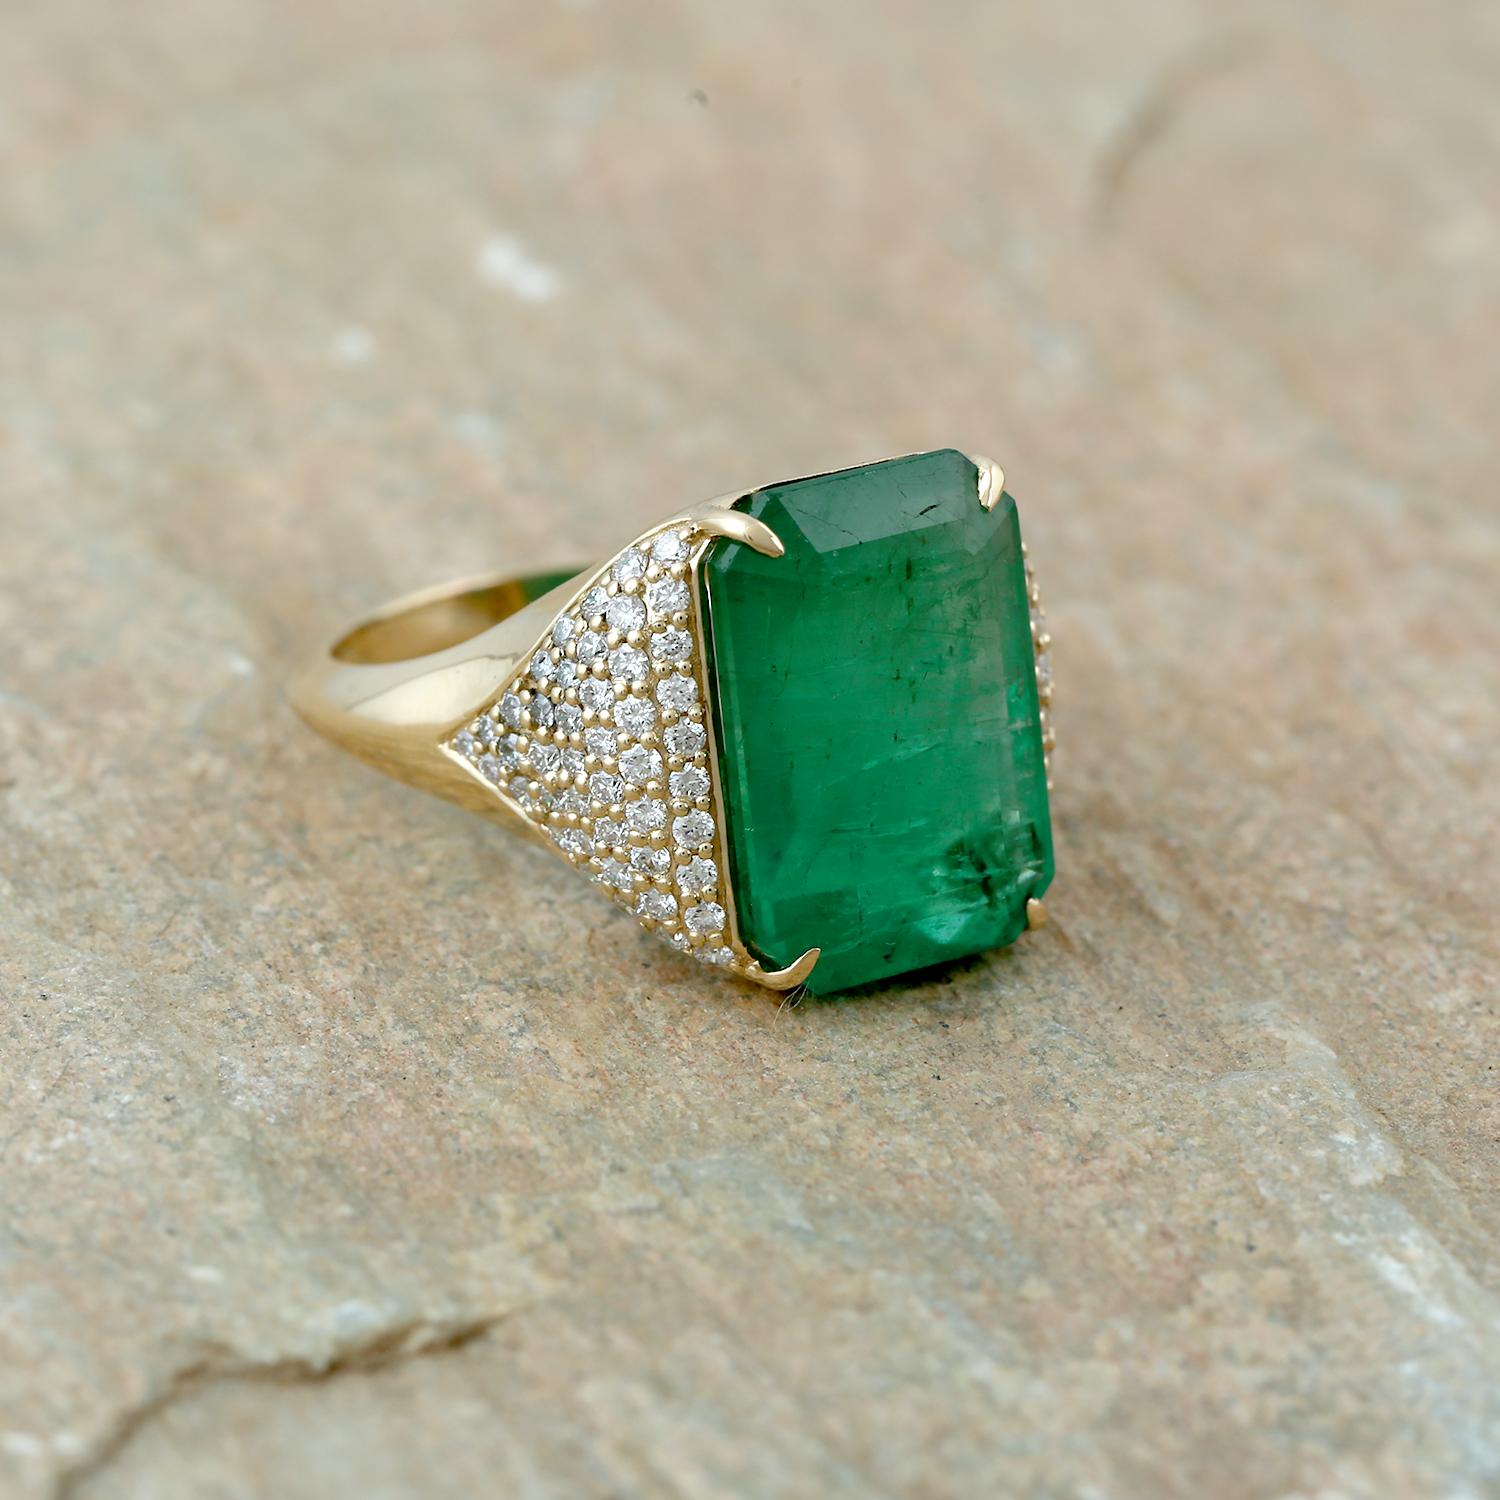 Octagon Cut Octogen Zambian Emerald Ring with Side Pave Diamonds Made in 18k Yellow Gold For Sale